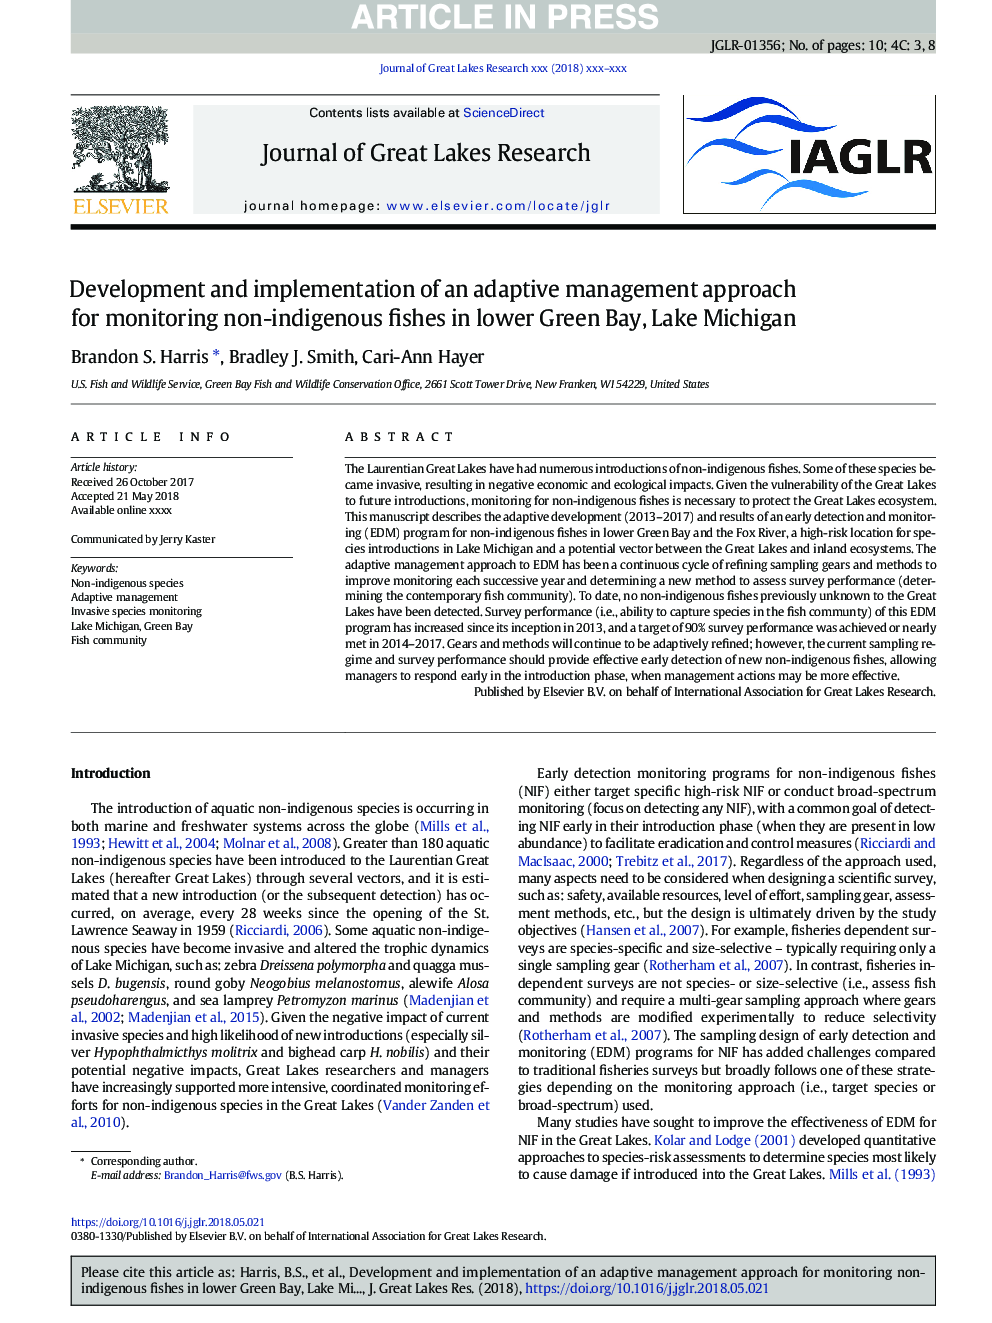 Development and implementation of an adaptive management approach for monitoring non-indigenous fishes in lower Green Bay, Lake Michigan